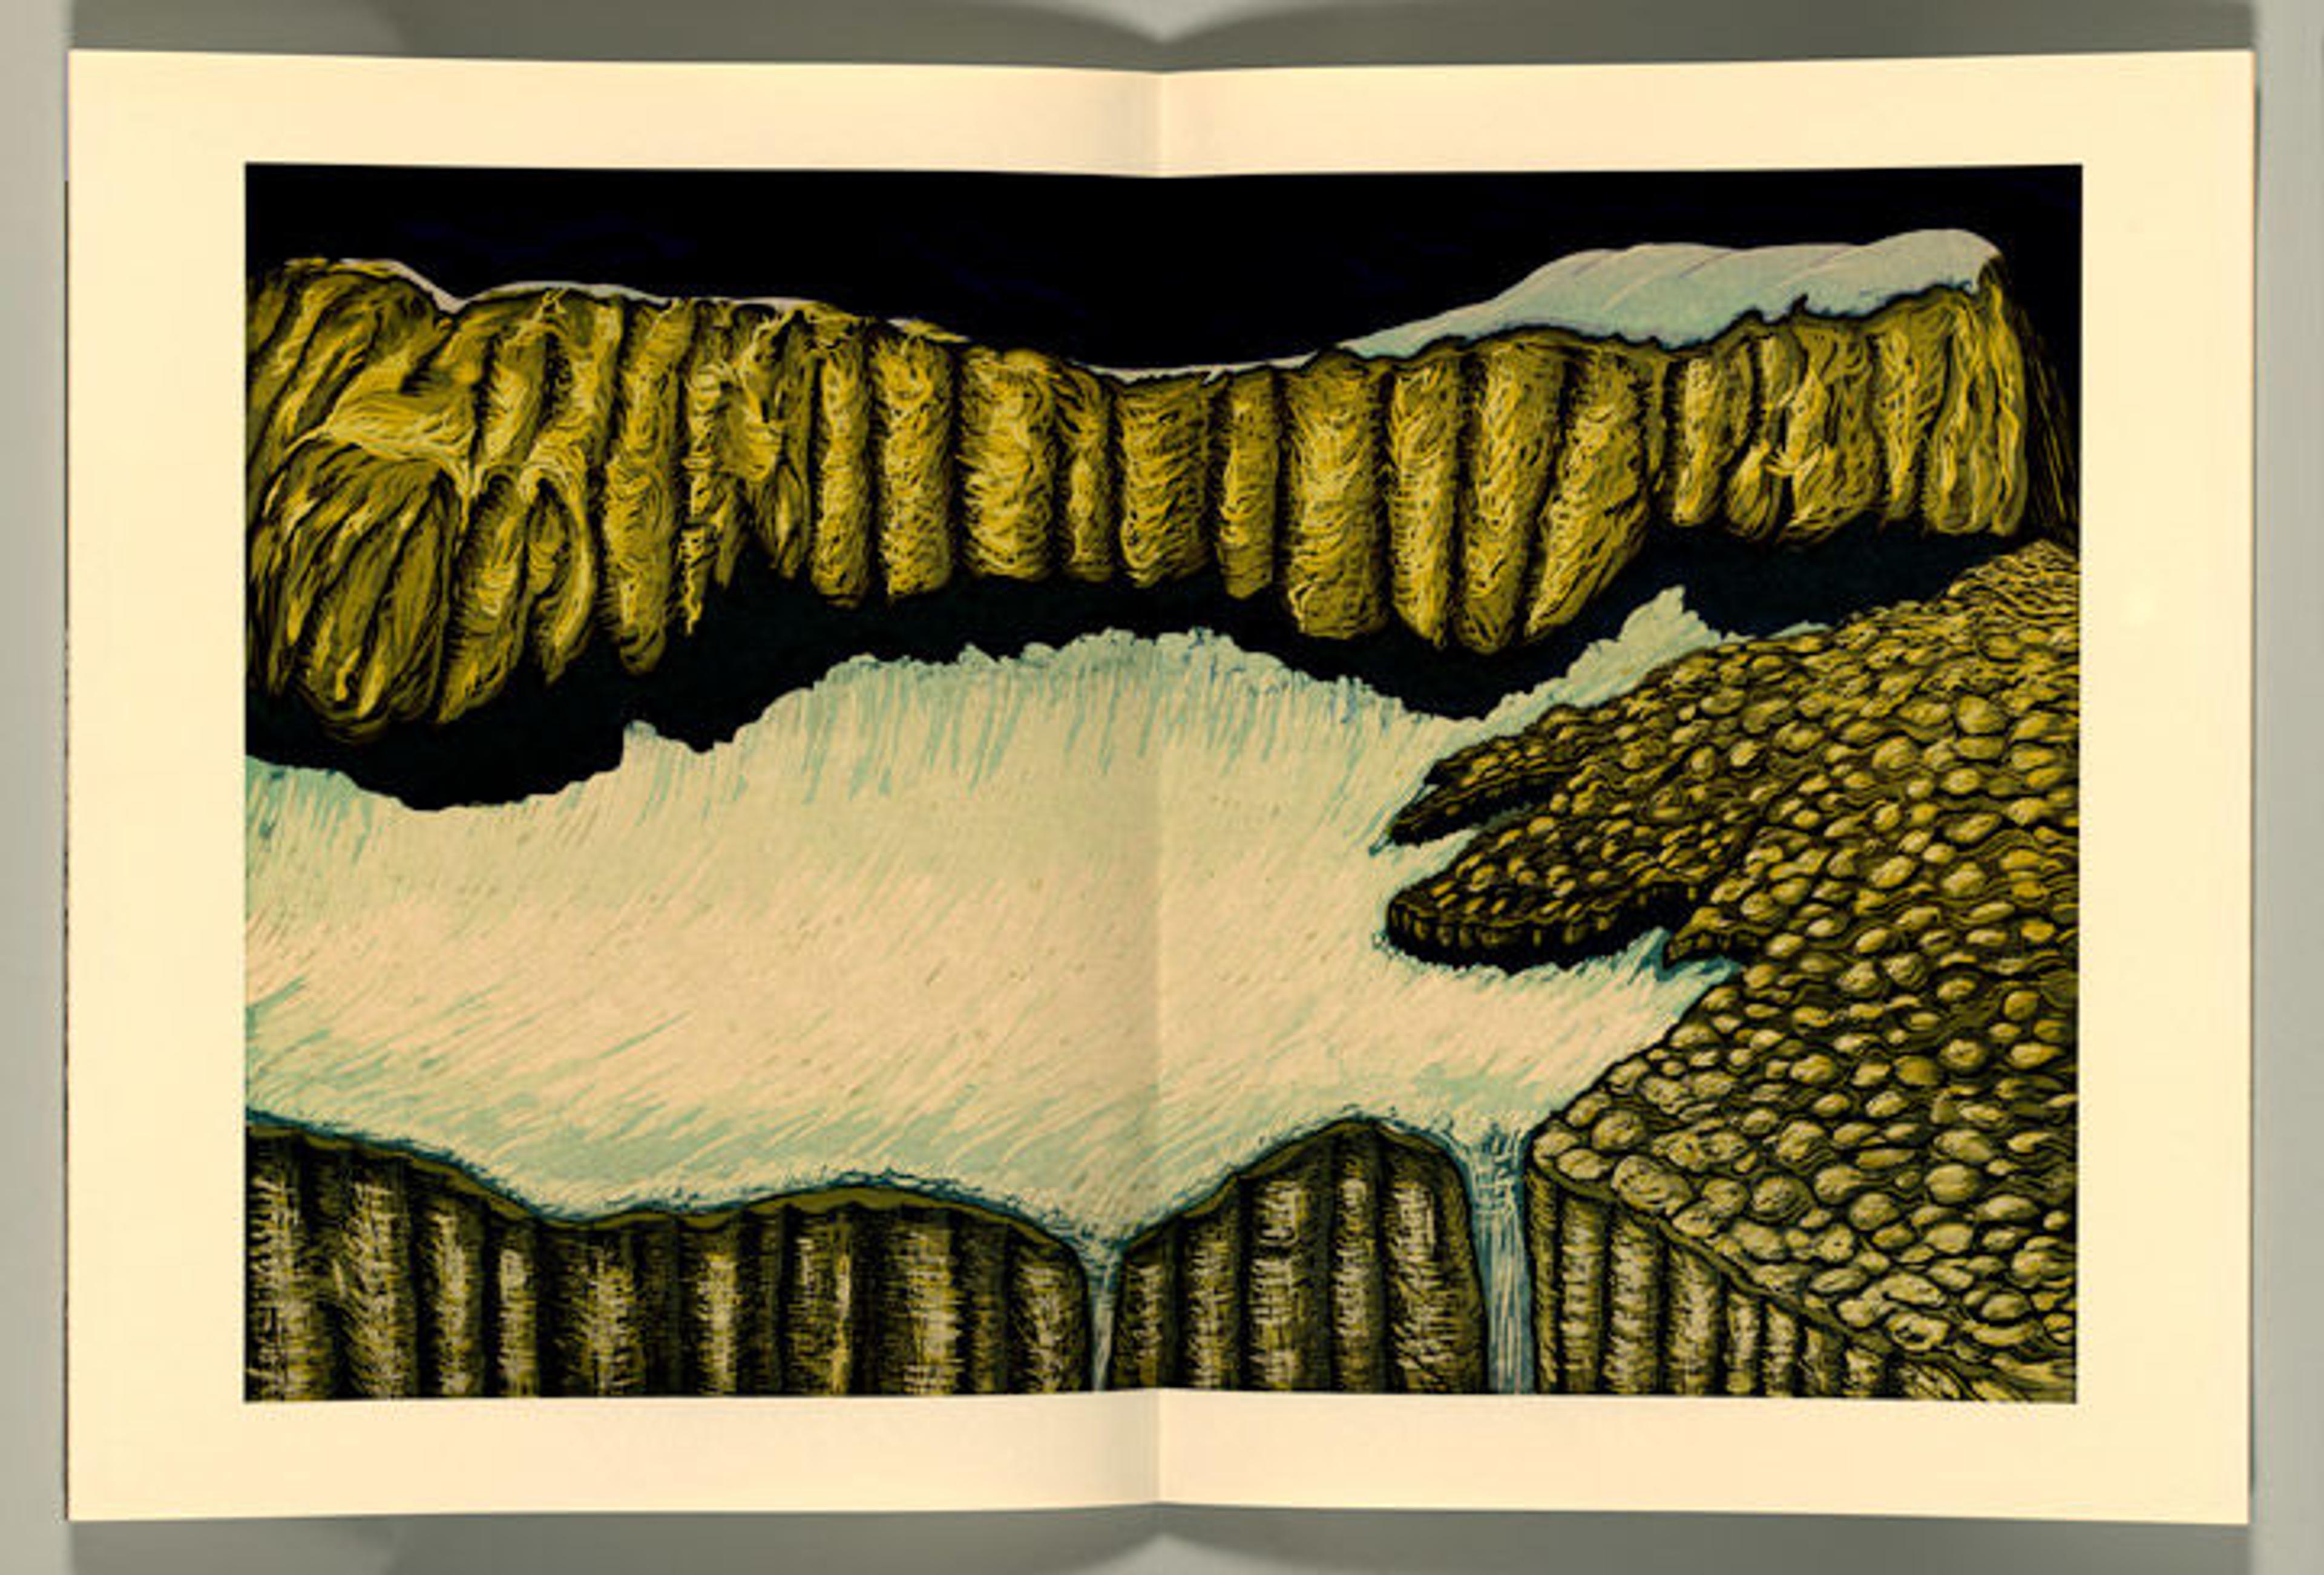 Page spread from Todd Anderson, Bruce Crownover, and Ian van Coller's artist book 'The Last Glacier' showing a woodblock print of a disappearing glacier